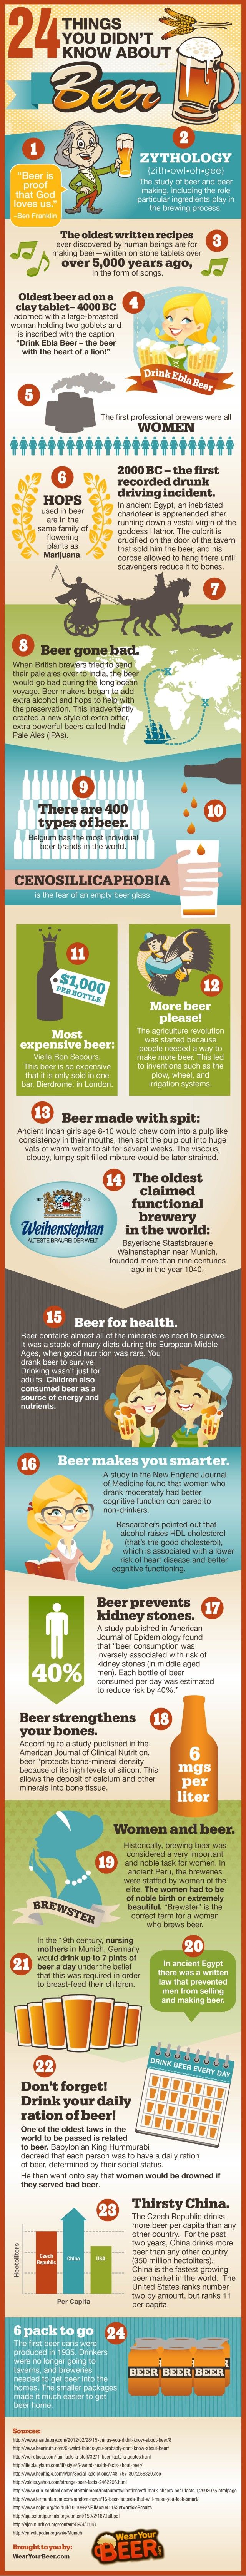 Things You Don’t Know About Beer (Infographic)